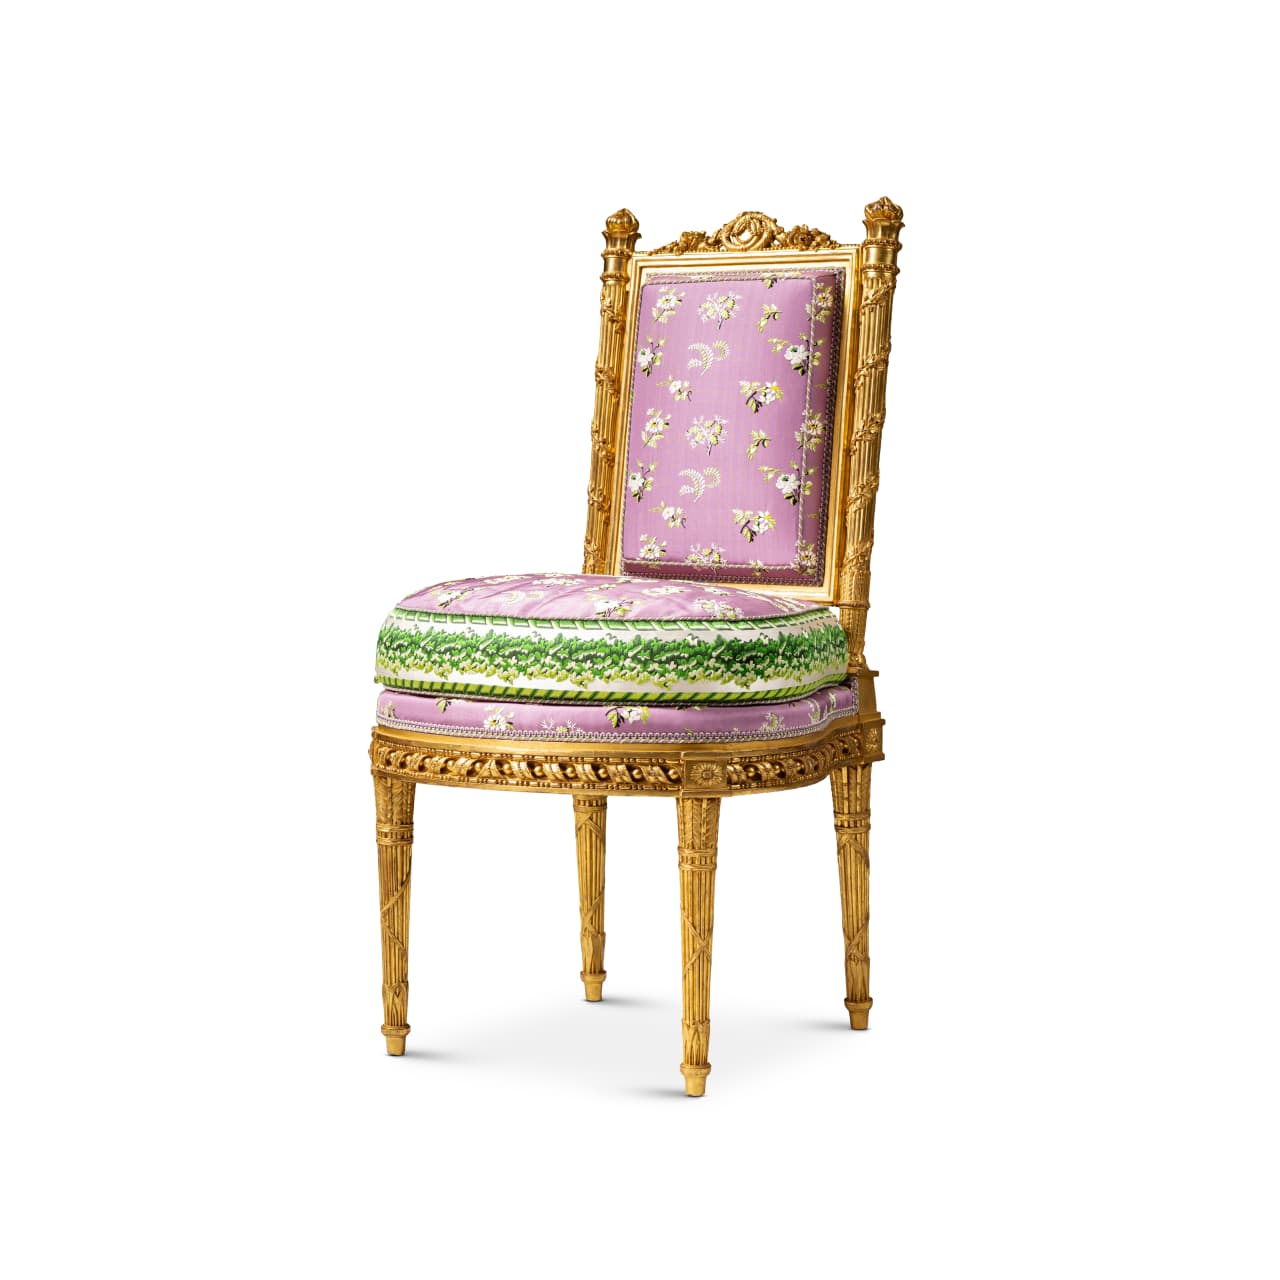 A Louis XVI period gilded wood chair, stamped by G. Jacob, from Marie Antoinette’s boudoir in Versailles. Sotheby’s Paris
